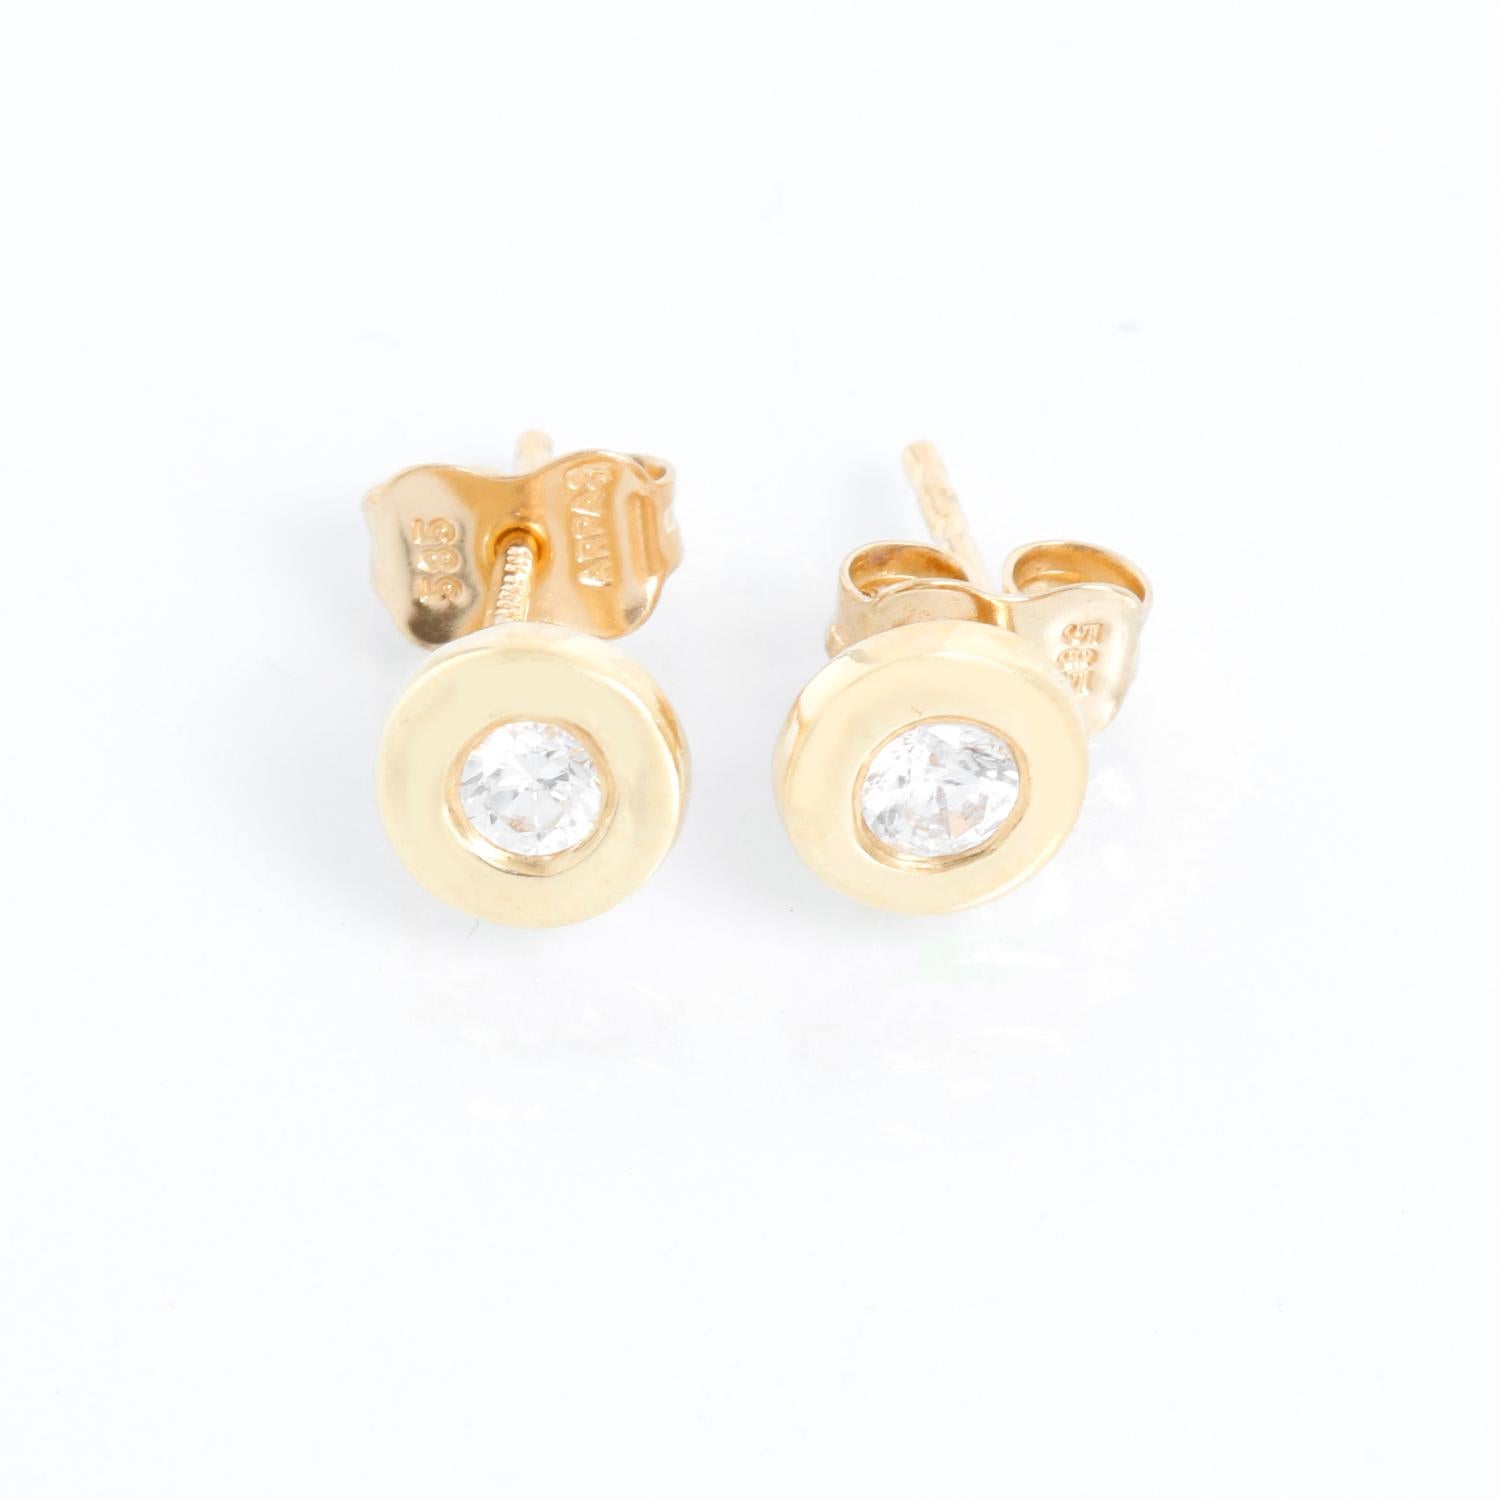 Arpas 14K Yellow Gold  Diamond Bezel Set Studs - Approx. .30 carats -Diamond color H -Diamond clarity SI2. Measure 6 mm width. Perfect for an every day stud. Hallmarked.